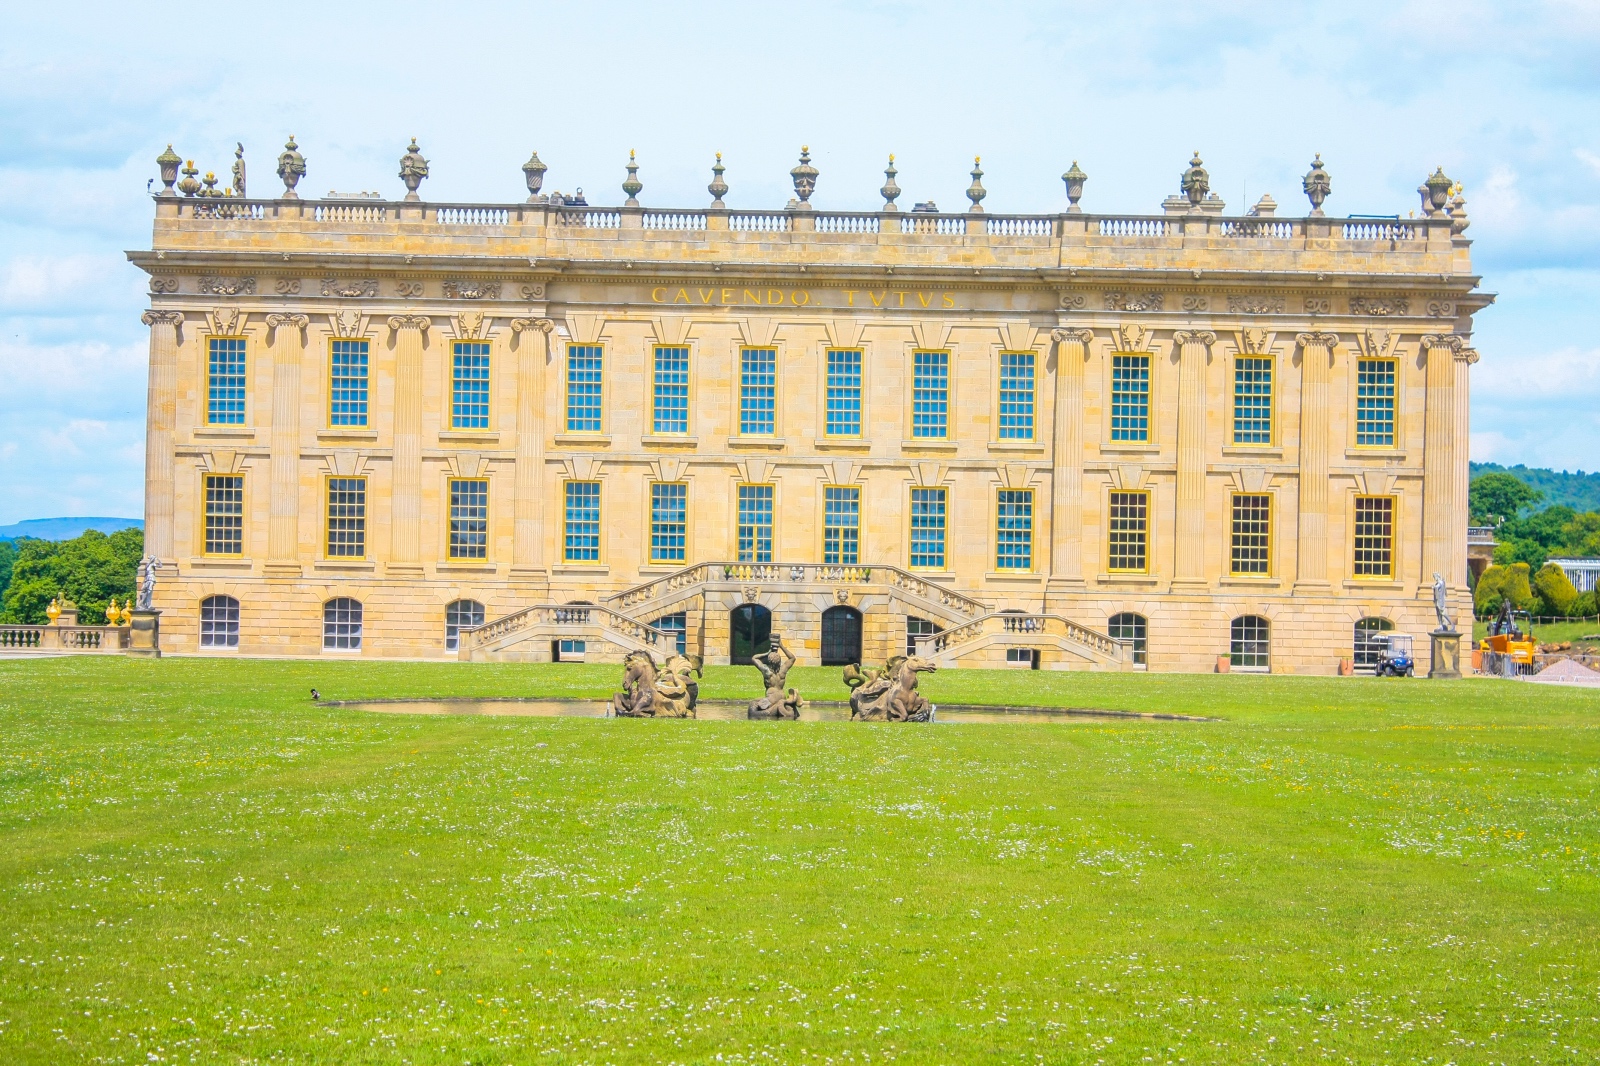 The front of Chatsworth House